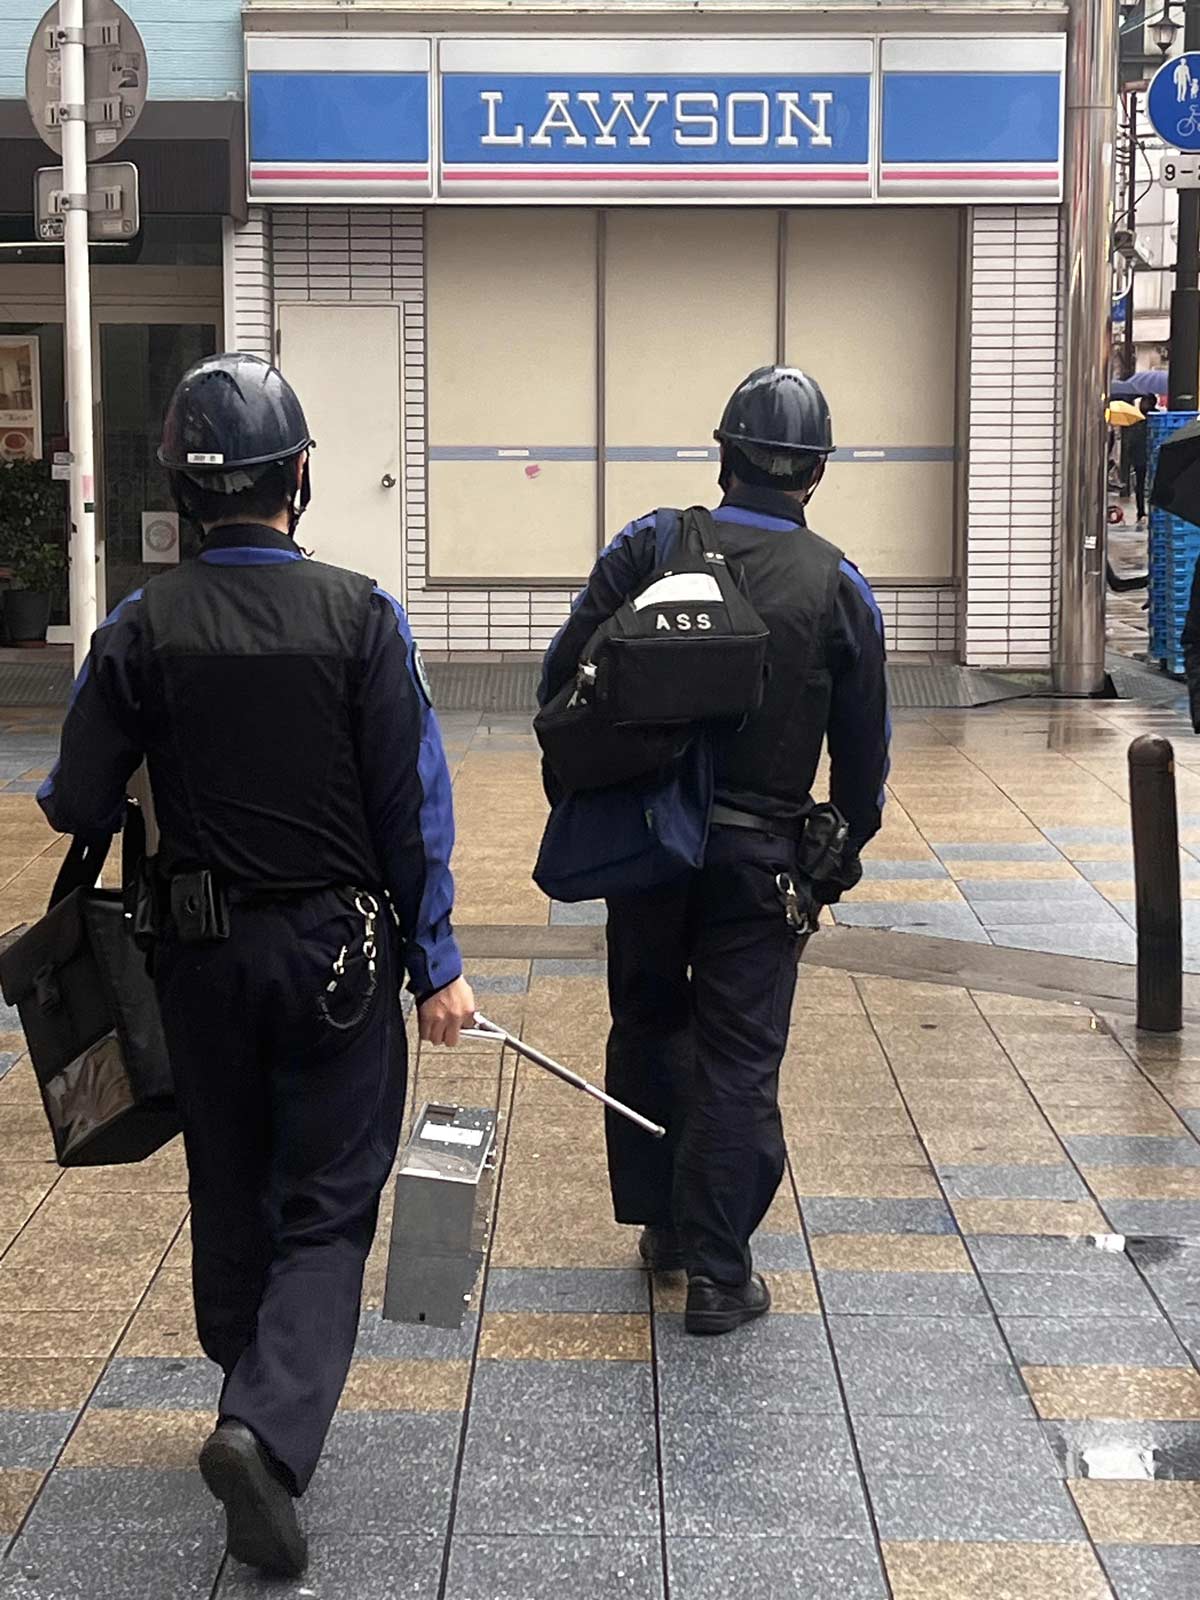 I work in Japan. Saw these security guards hauling ass!